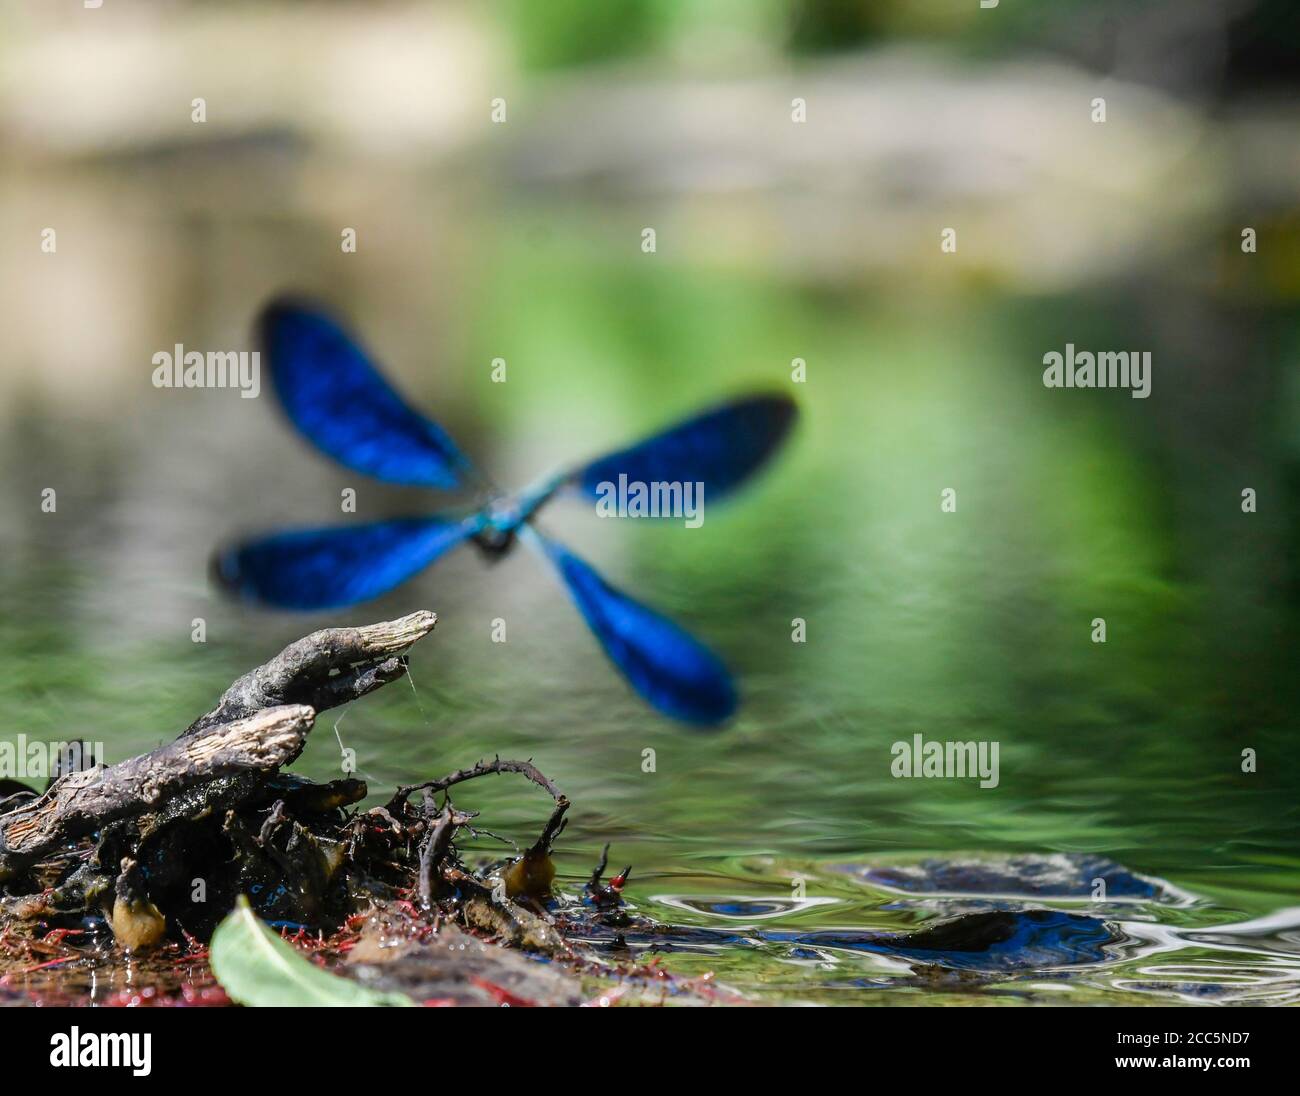 Silhouette of male damselfly in flight over his perch Stock Photo